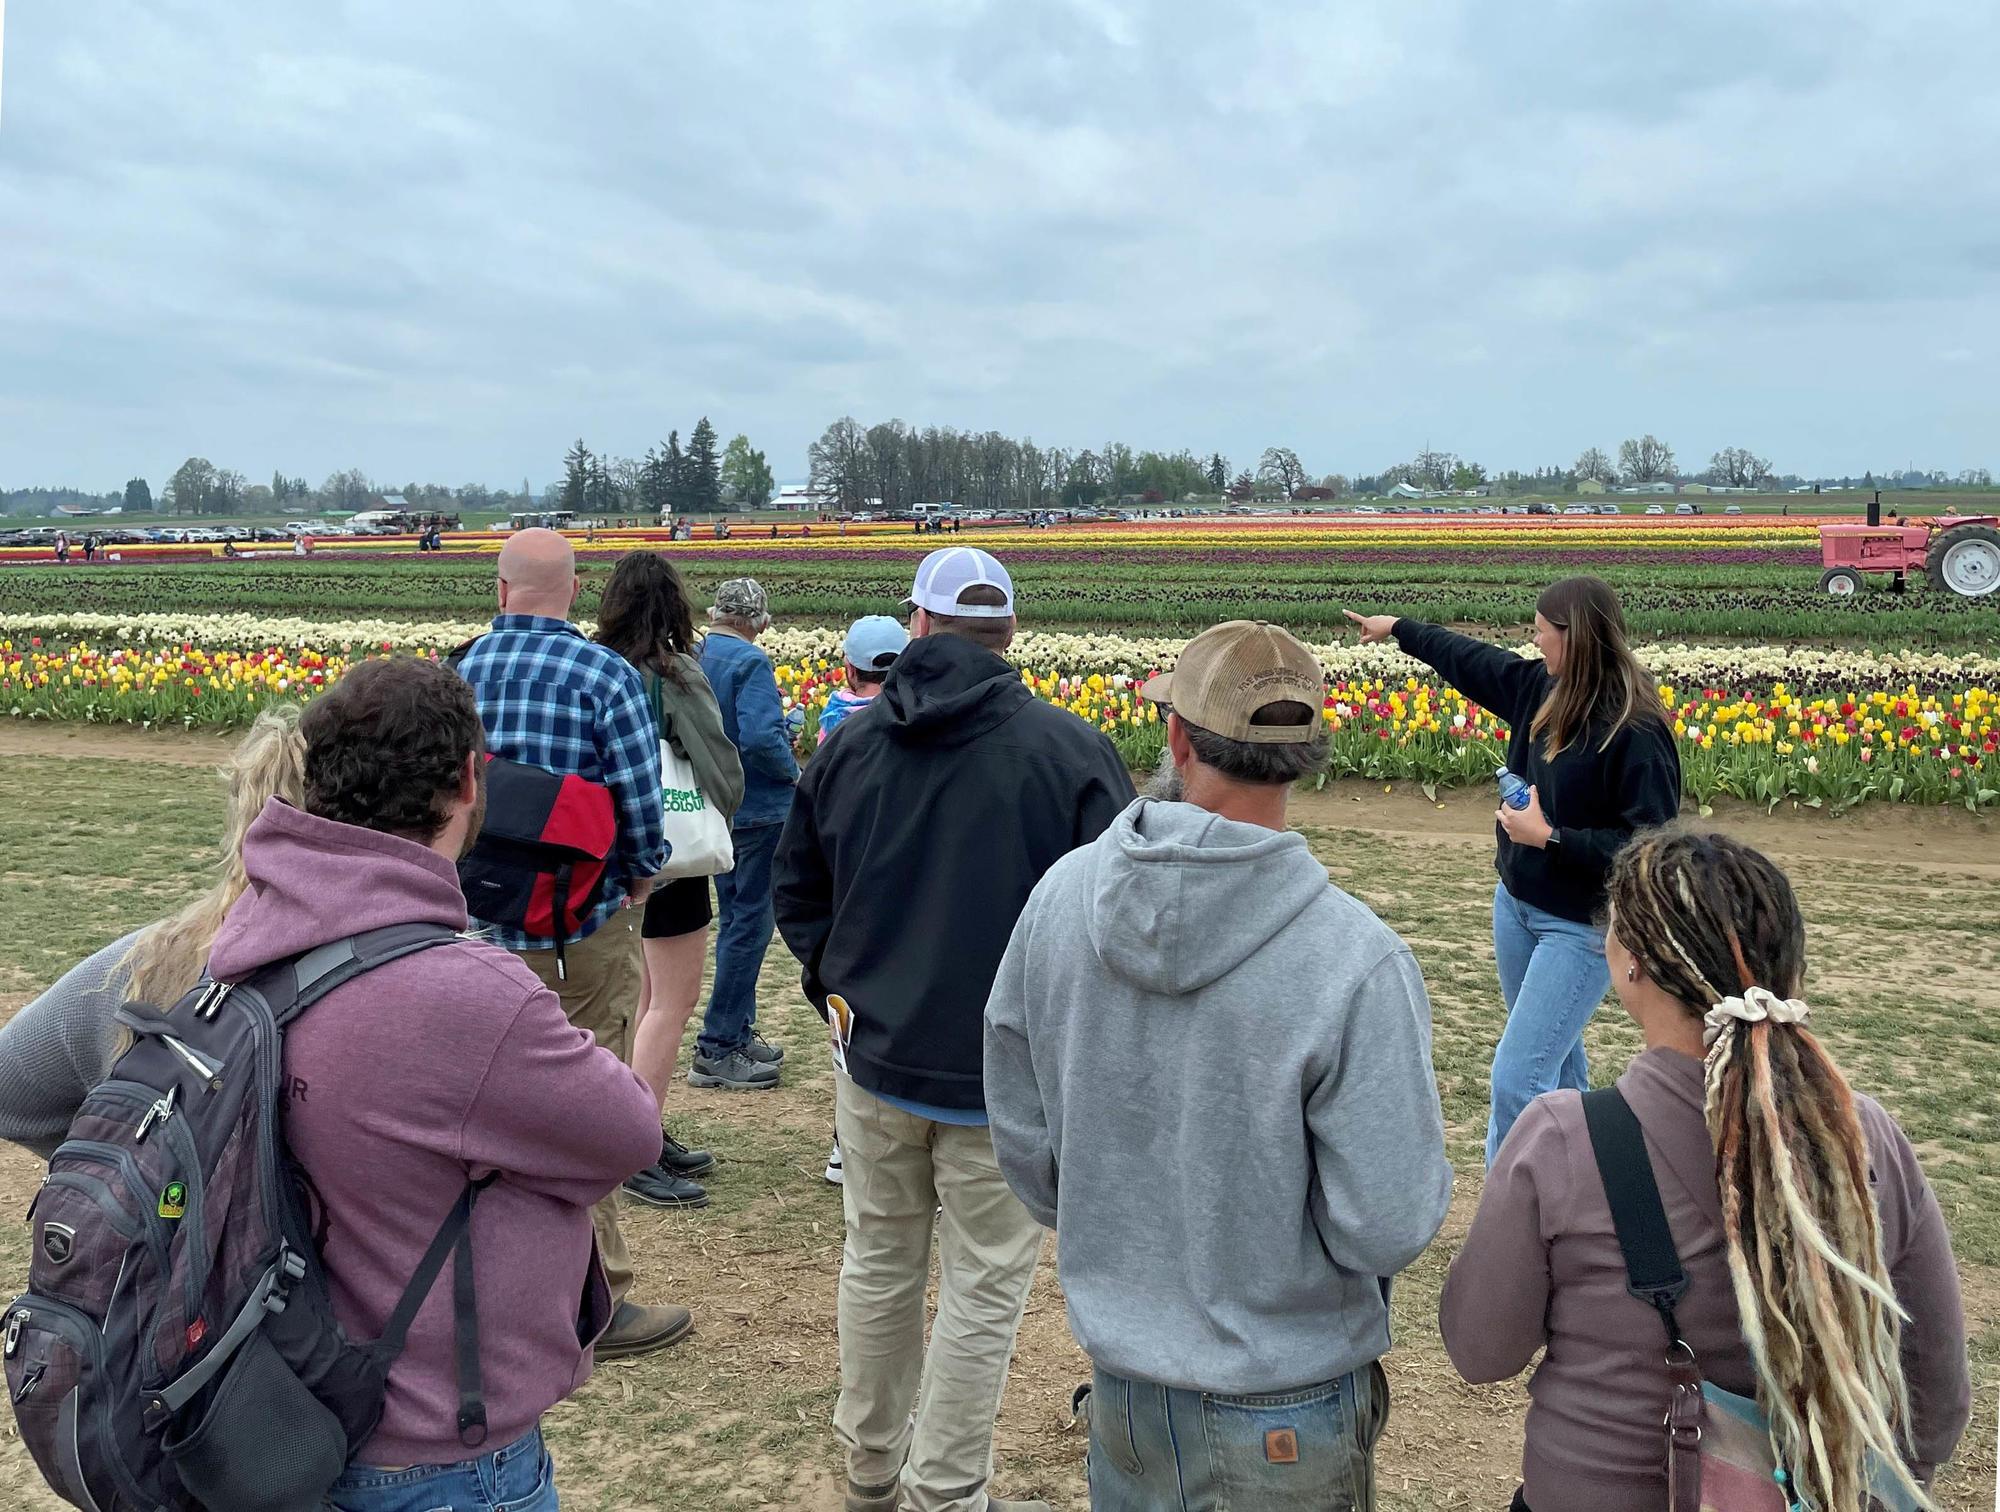 a guide shows a tour group where to go in front of a field of yellow and red tulips